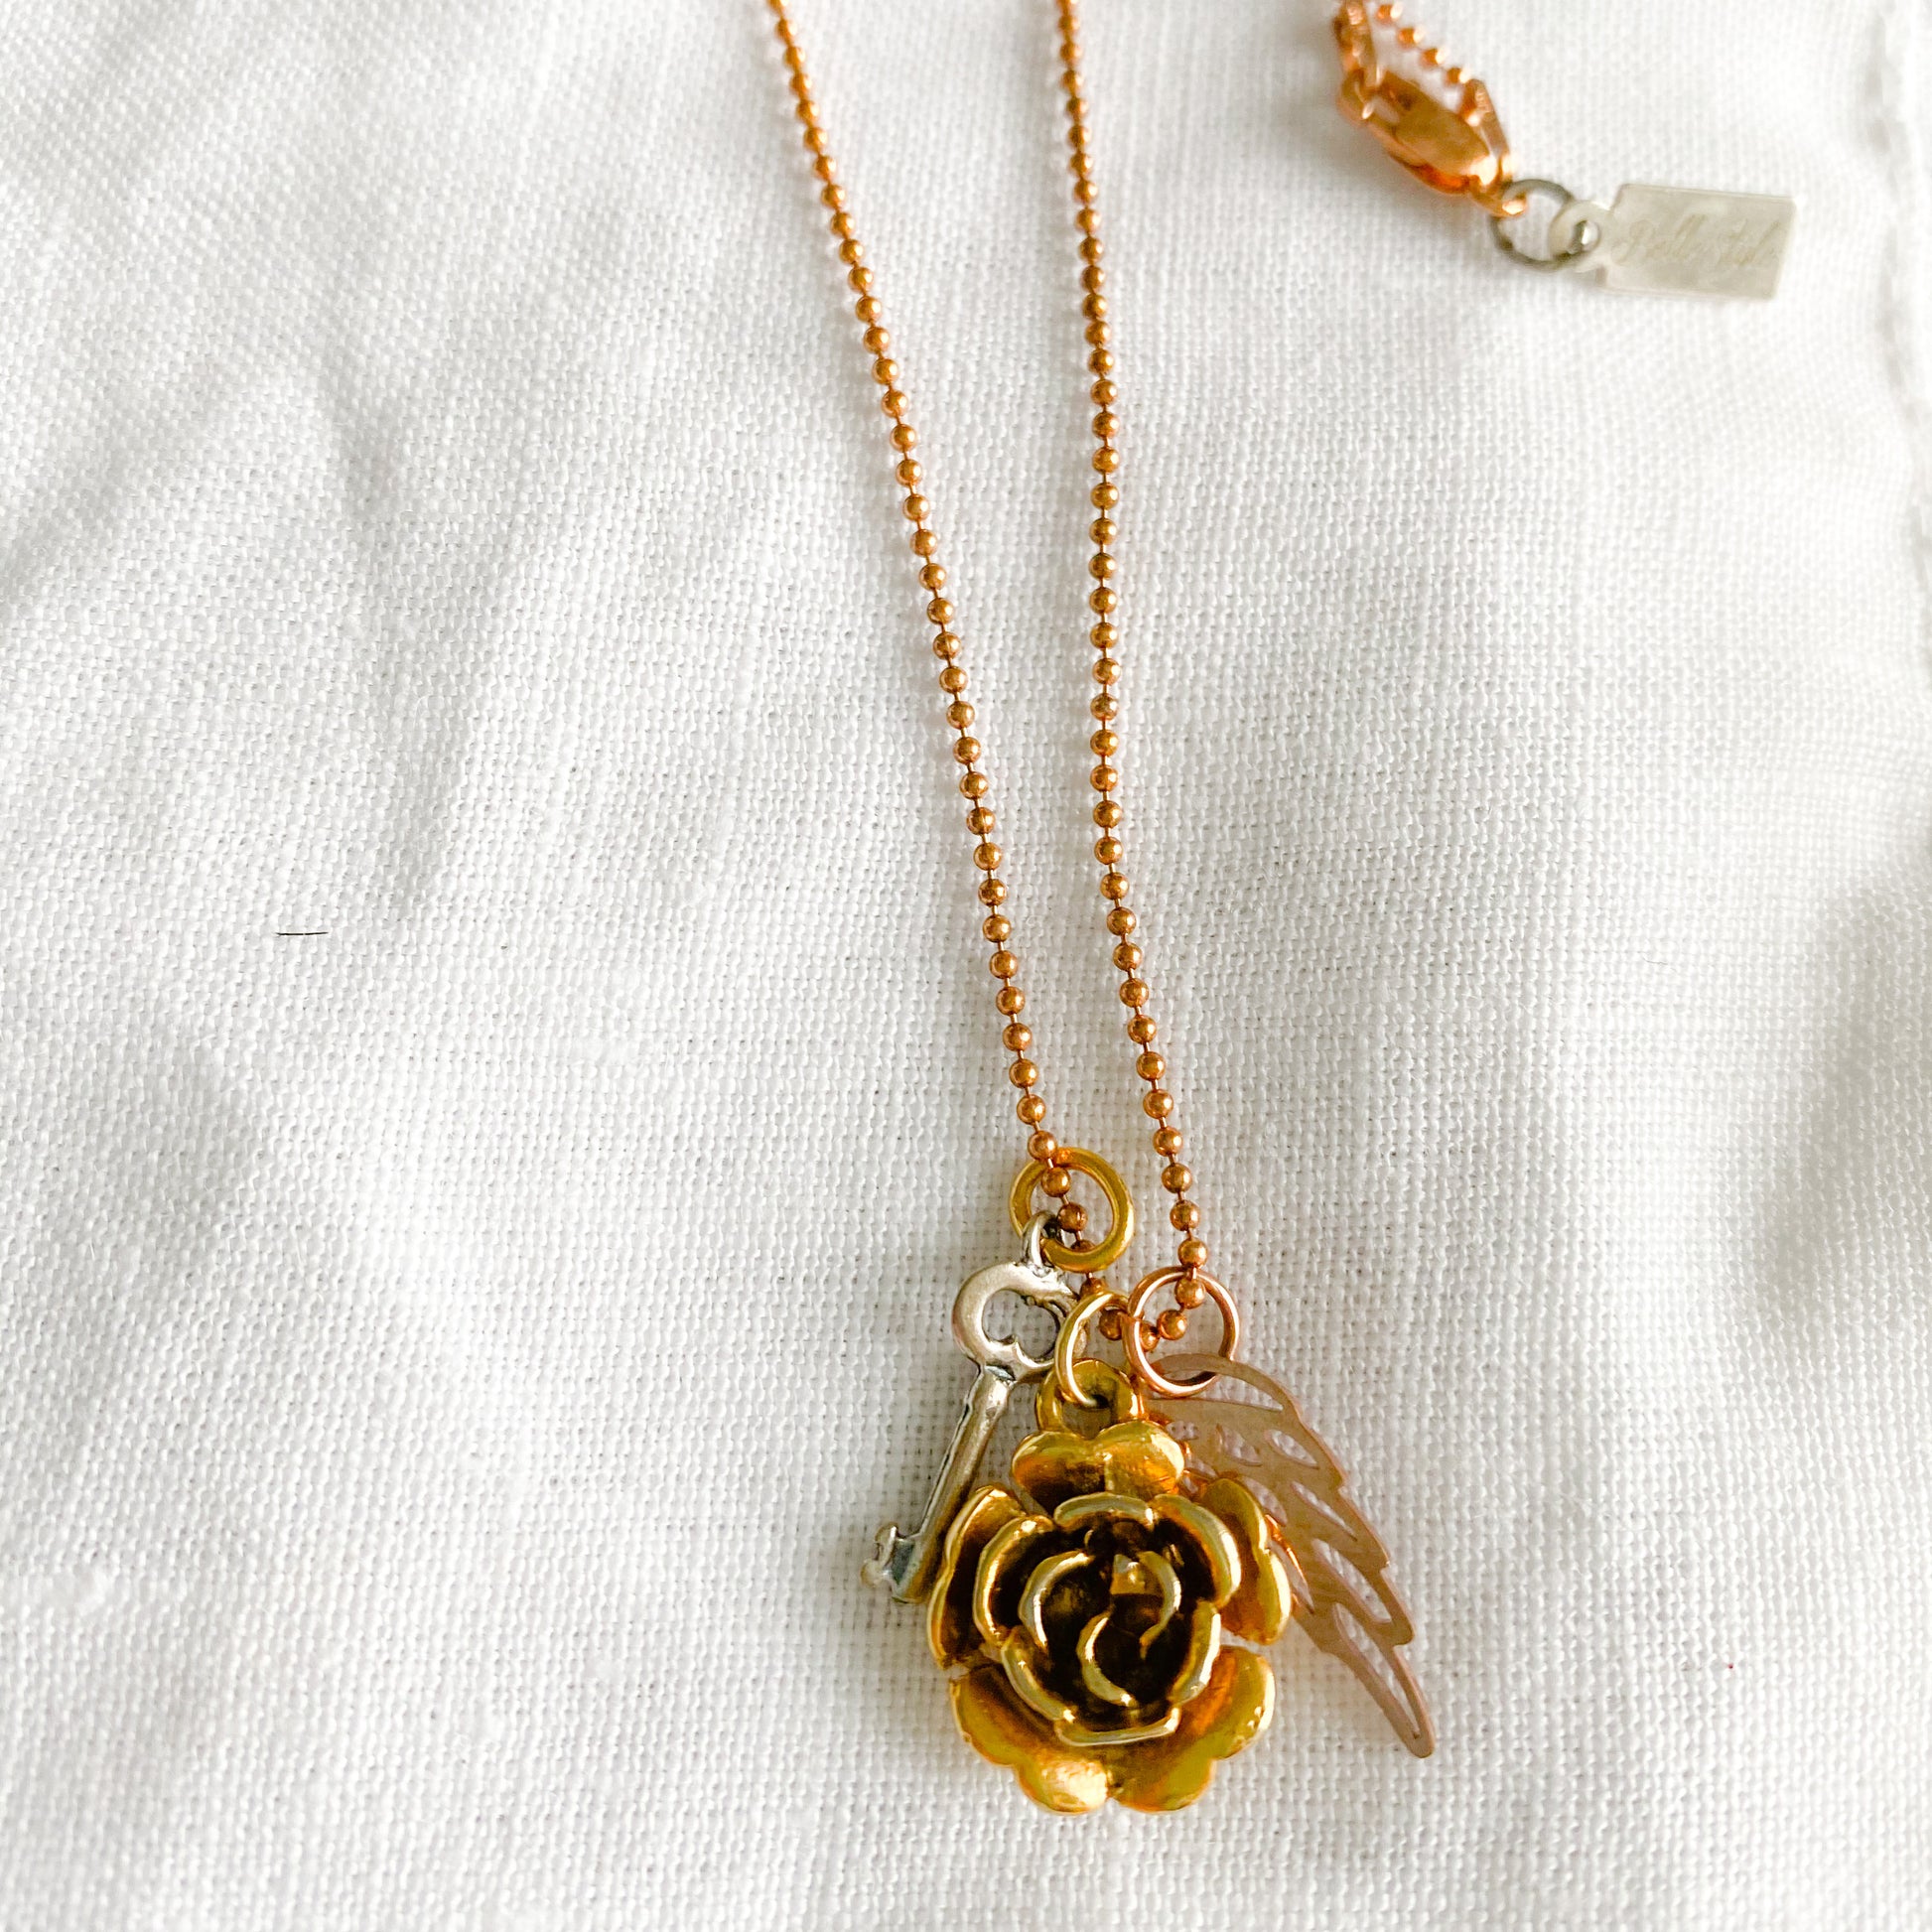 Rose Charm Necklace - BelleStyle